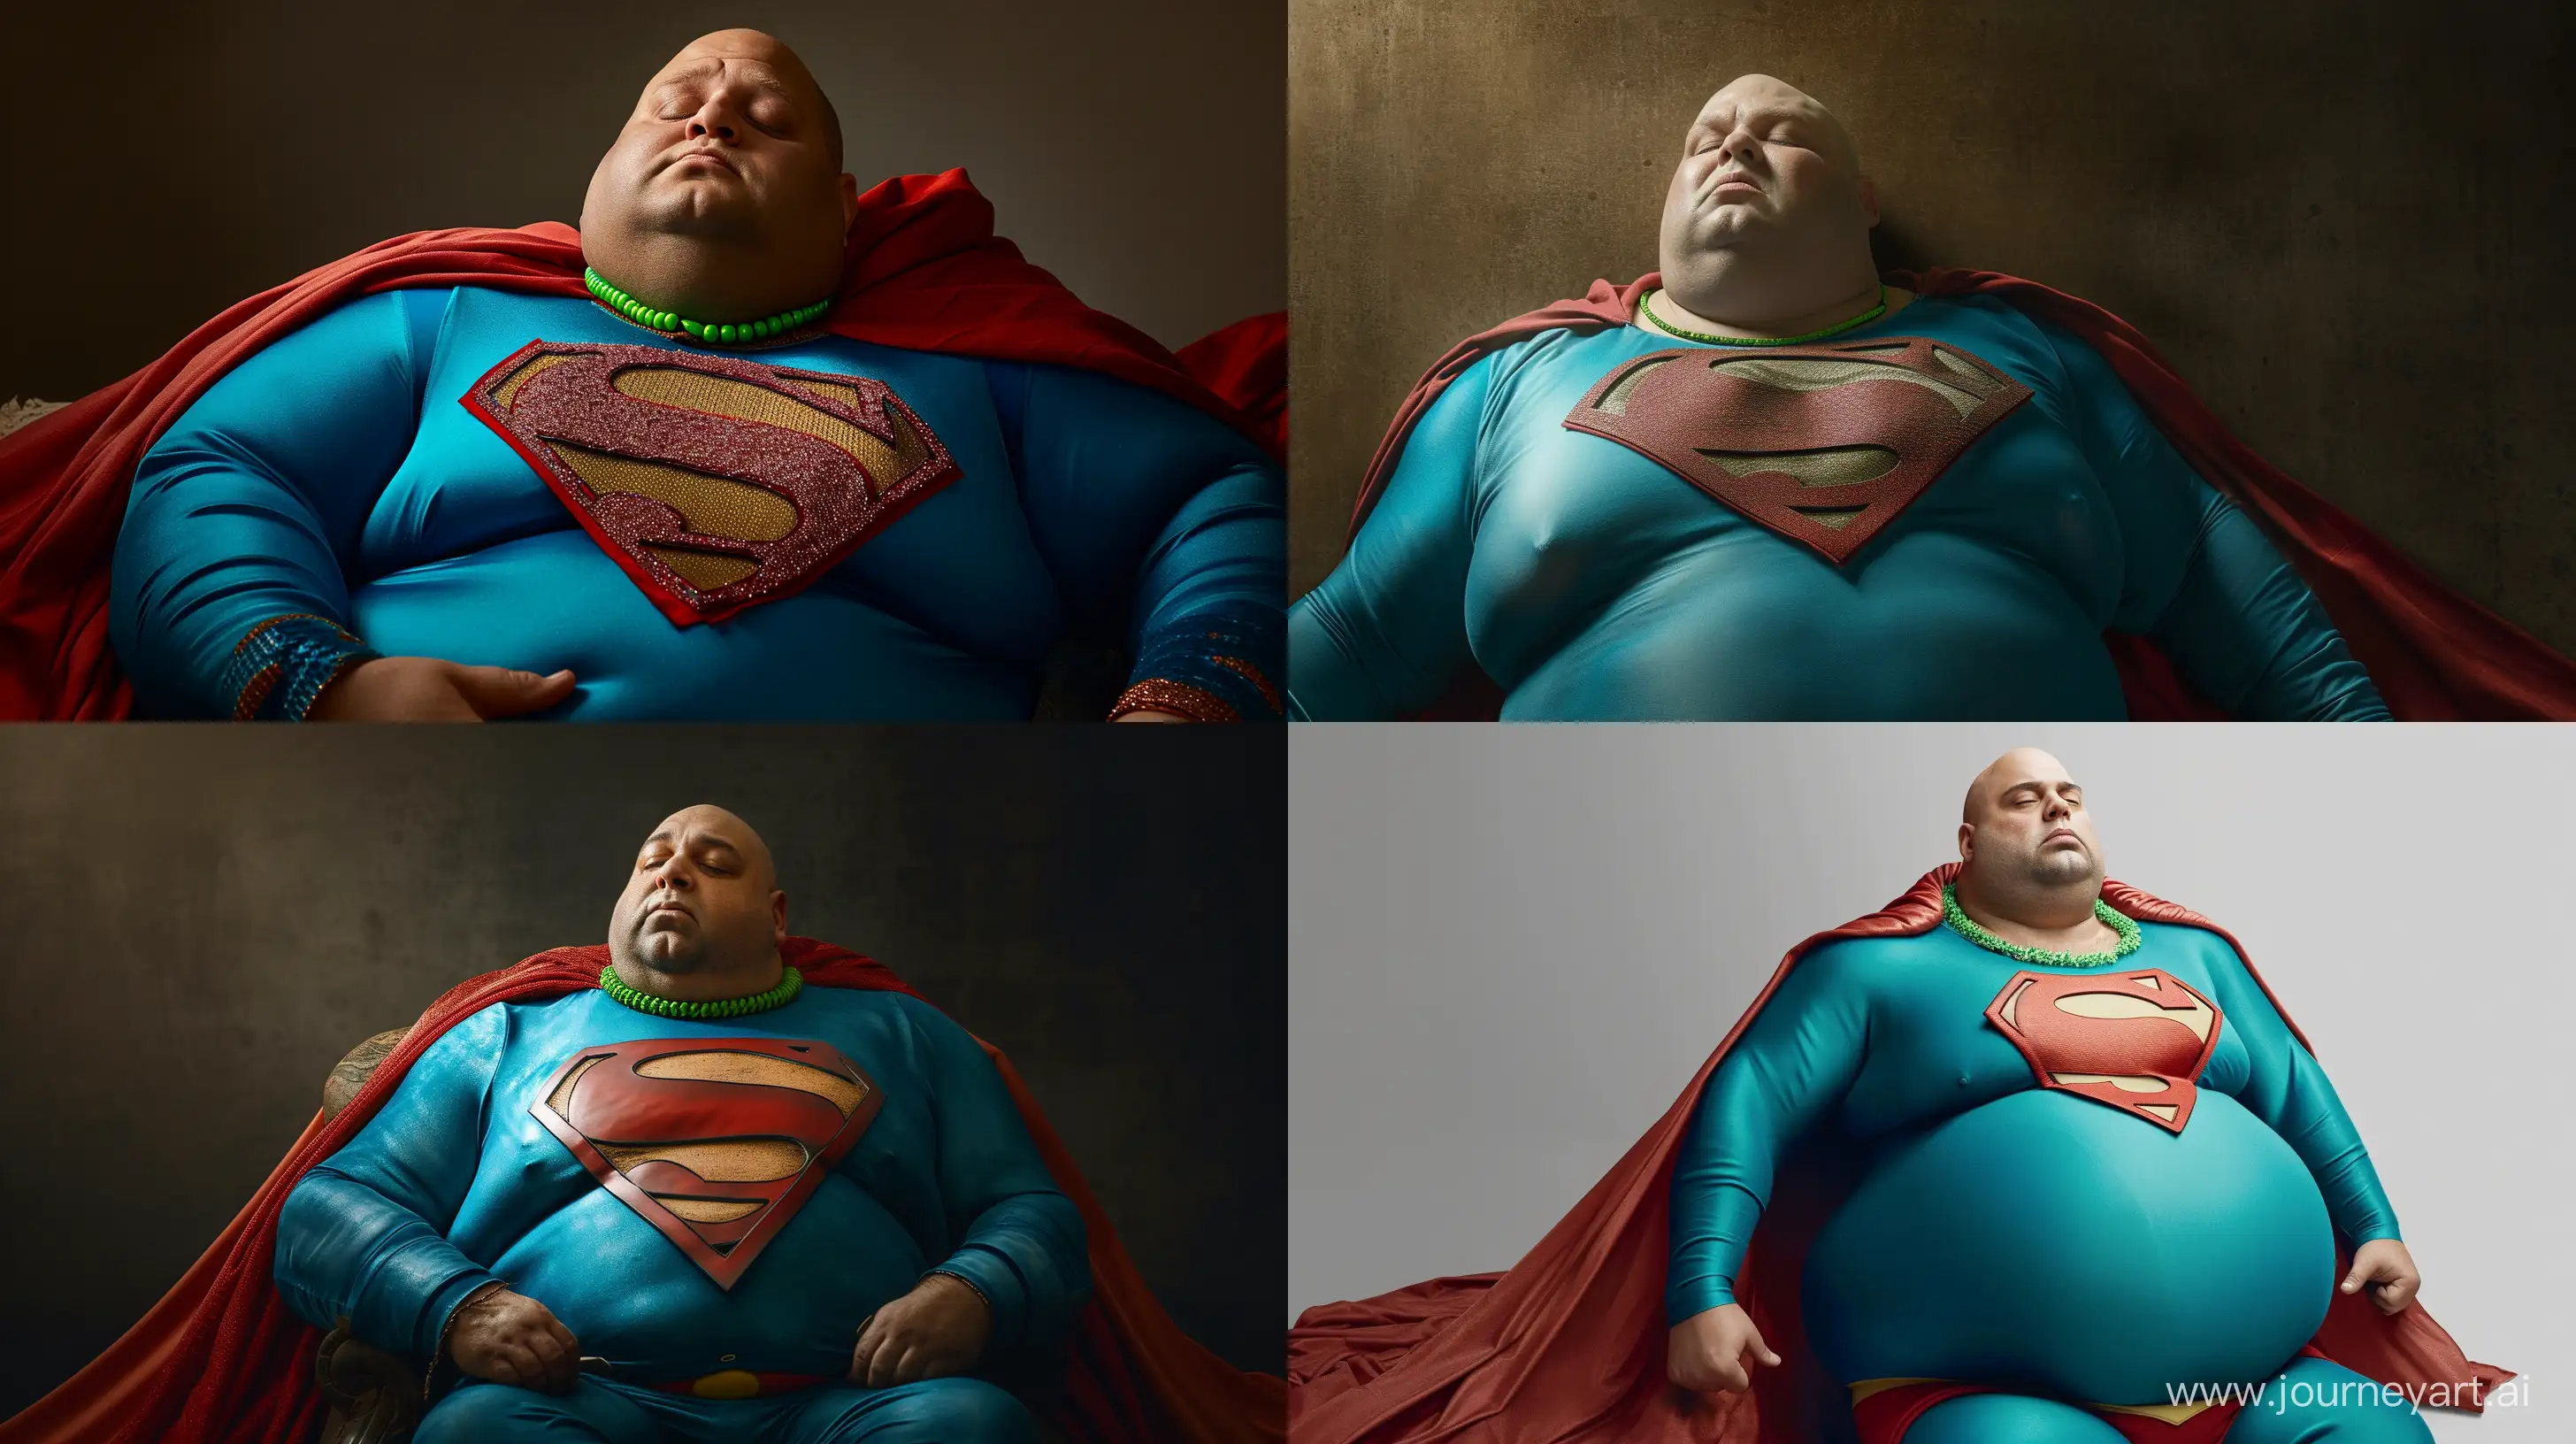 Chubby-Man-in-Bright-Blue-Superman-Costume-Sleeping-with-Red-Cape